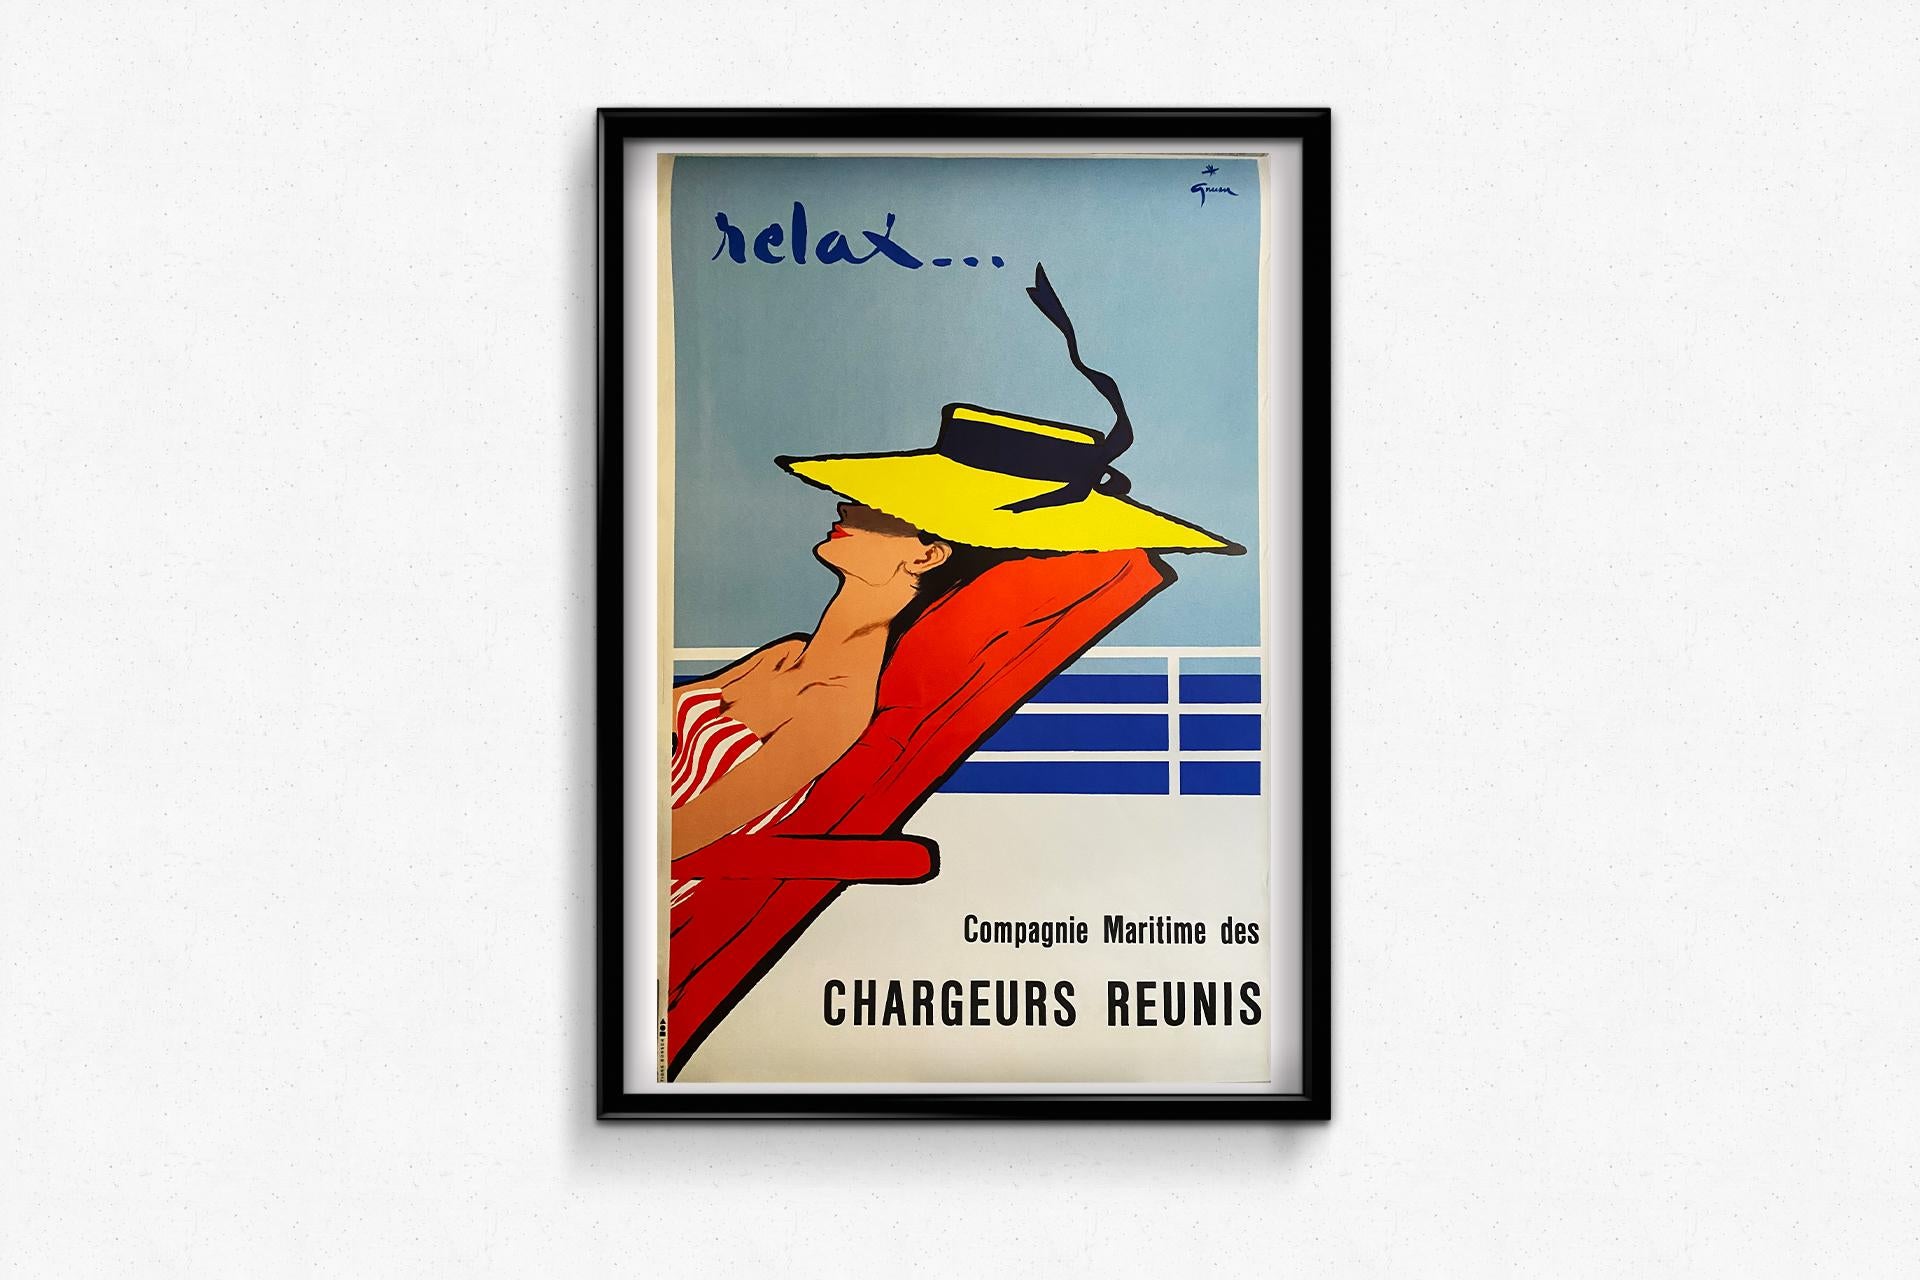 This original poster was made for Chargeurs Réunis, a major French shipping company based in Marseille.

René GRUAU 🇮🇹 (1909-2004) was a French-Italian illustrator, poster artist and painter renowned for his illustrations for fashion and